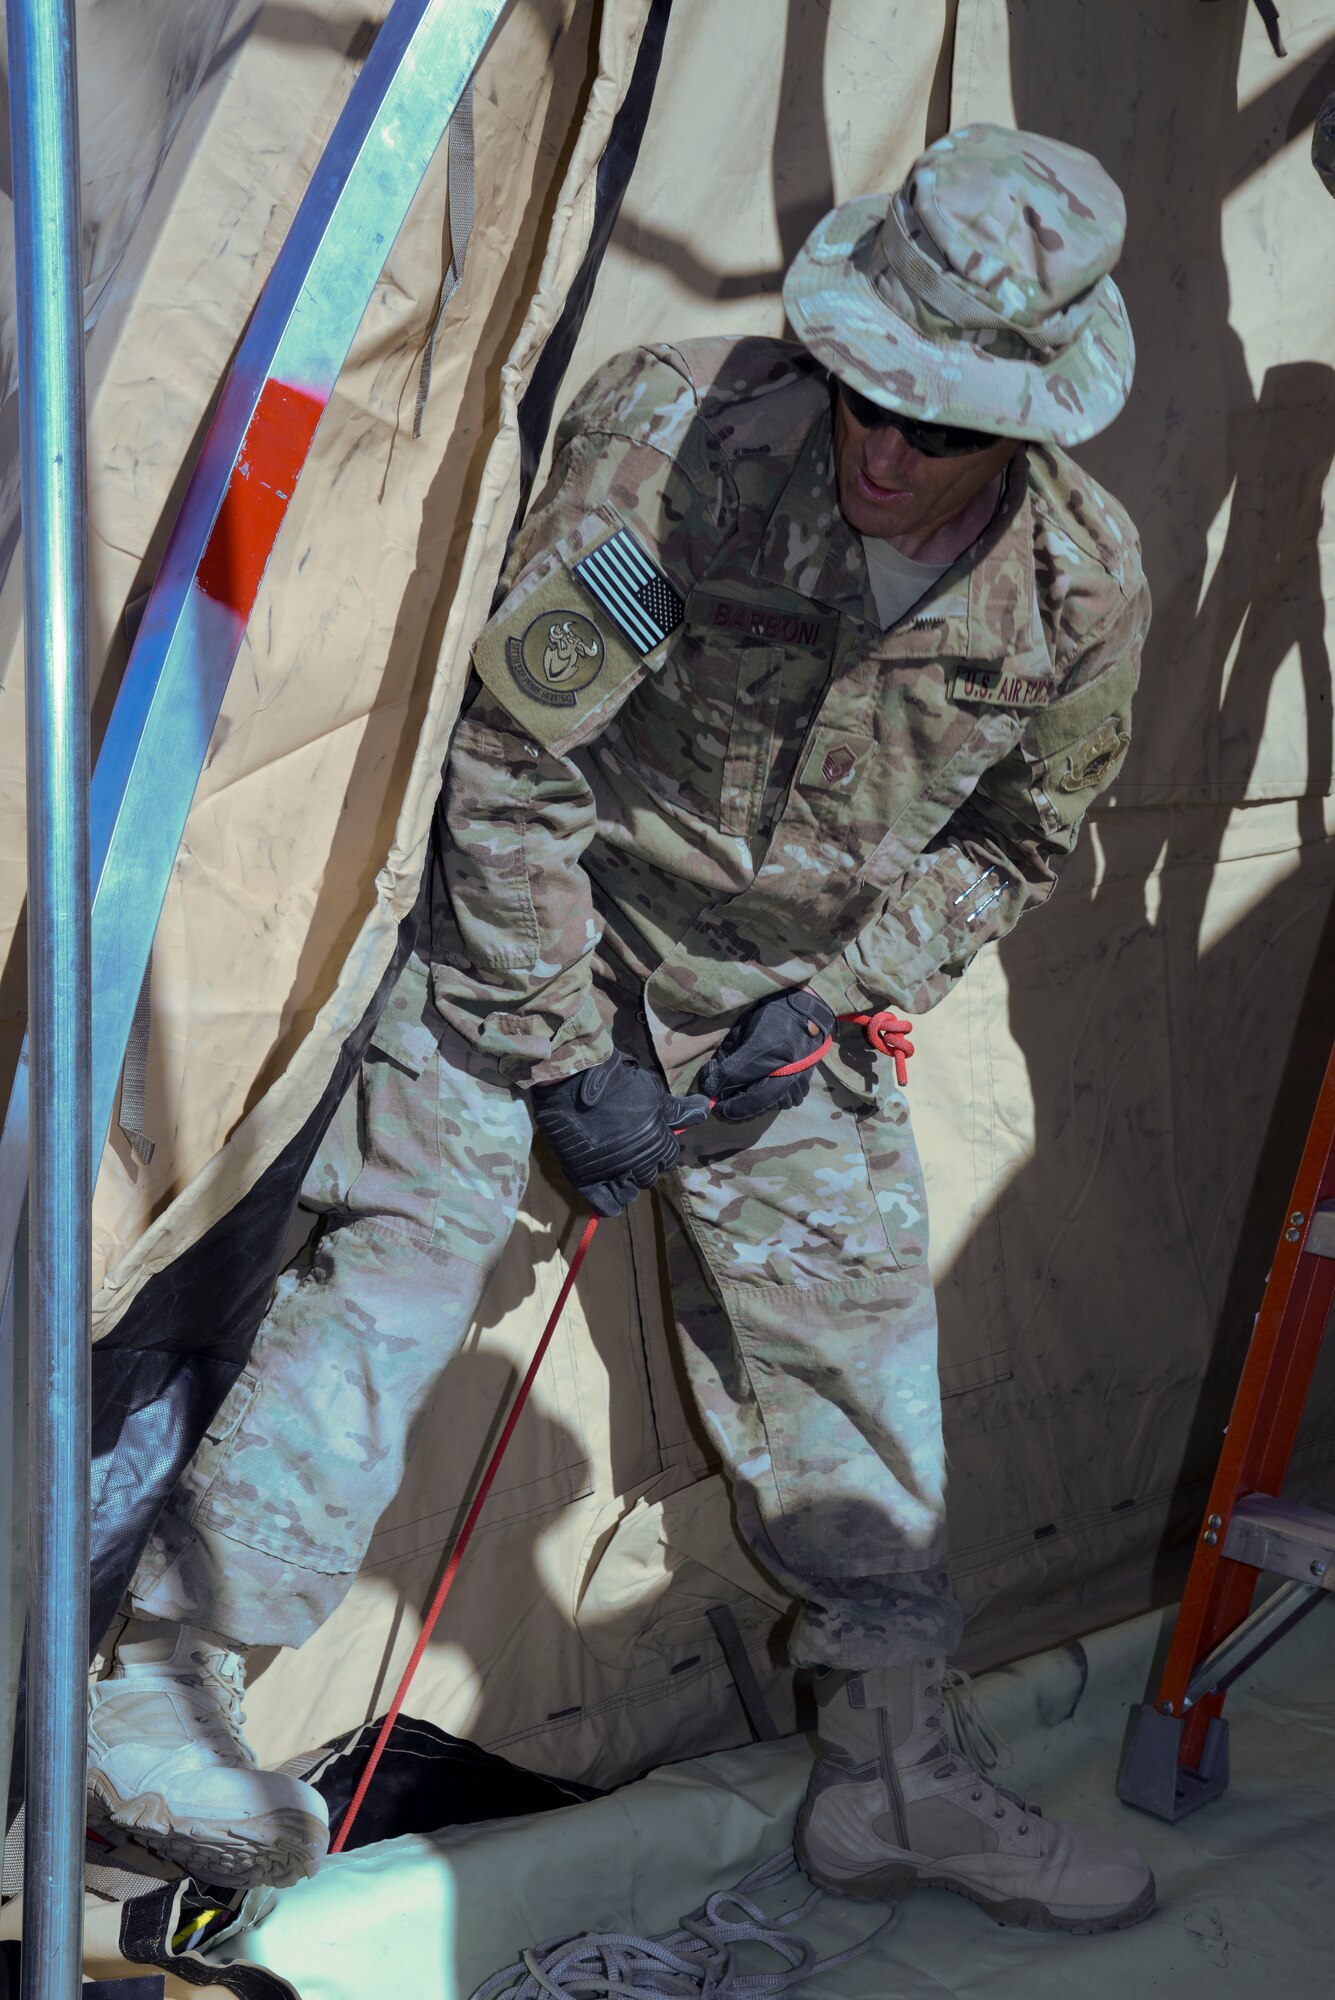 Master Sgt. John Barboni, 577th Expeditionary Prime Base Engineer Emergency Force Squadron, pulls the slack out of the canvas on one of four medical tents here Nov. 7, 2014. The four tents will serve as an Expeditionary Medical Support site to support the growing number of joint and coalition forces supporting Operation Inherent Resolve in the region.(U.S. Air Force photo by Tech. Sgt. Jared Marquis/released)